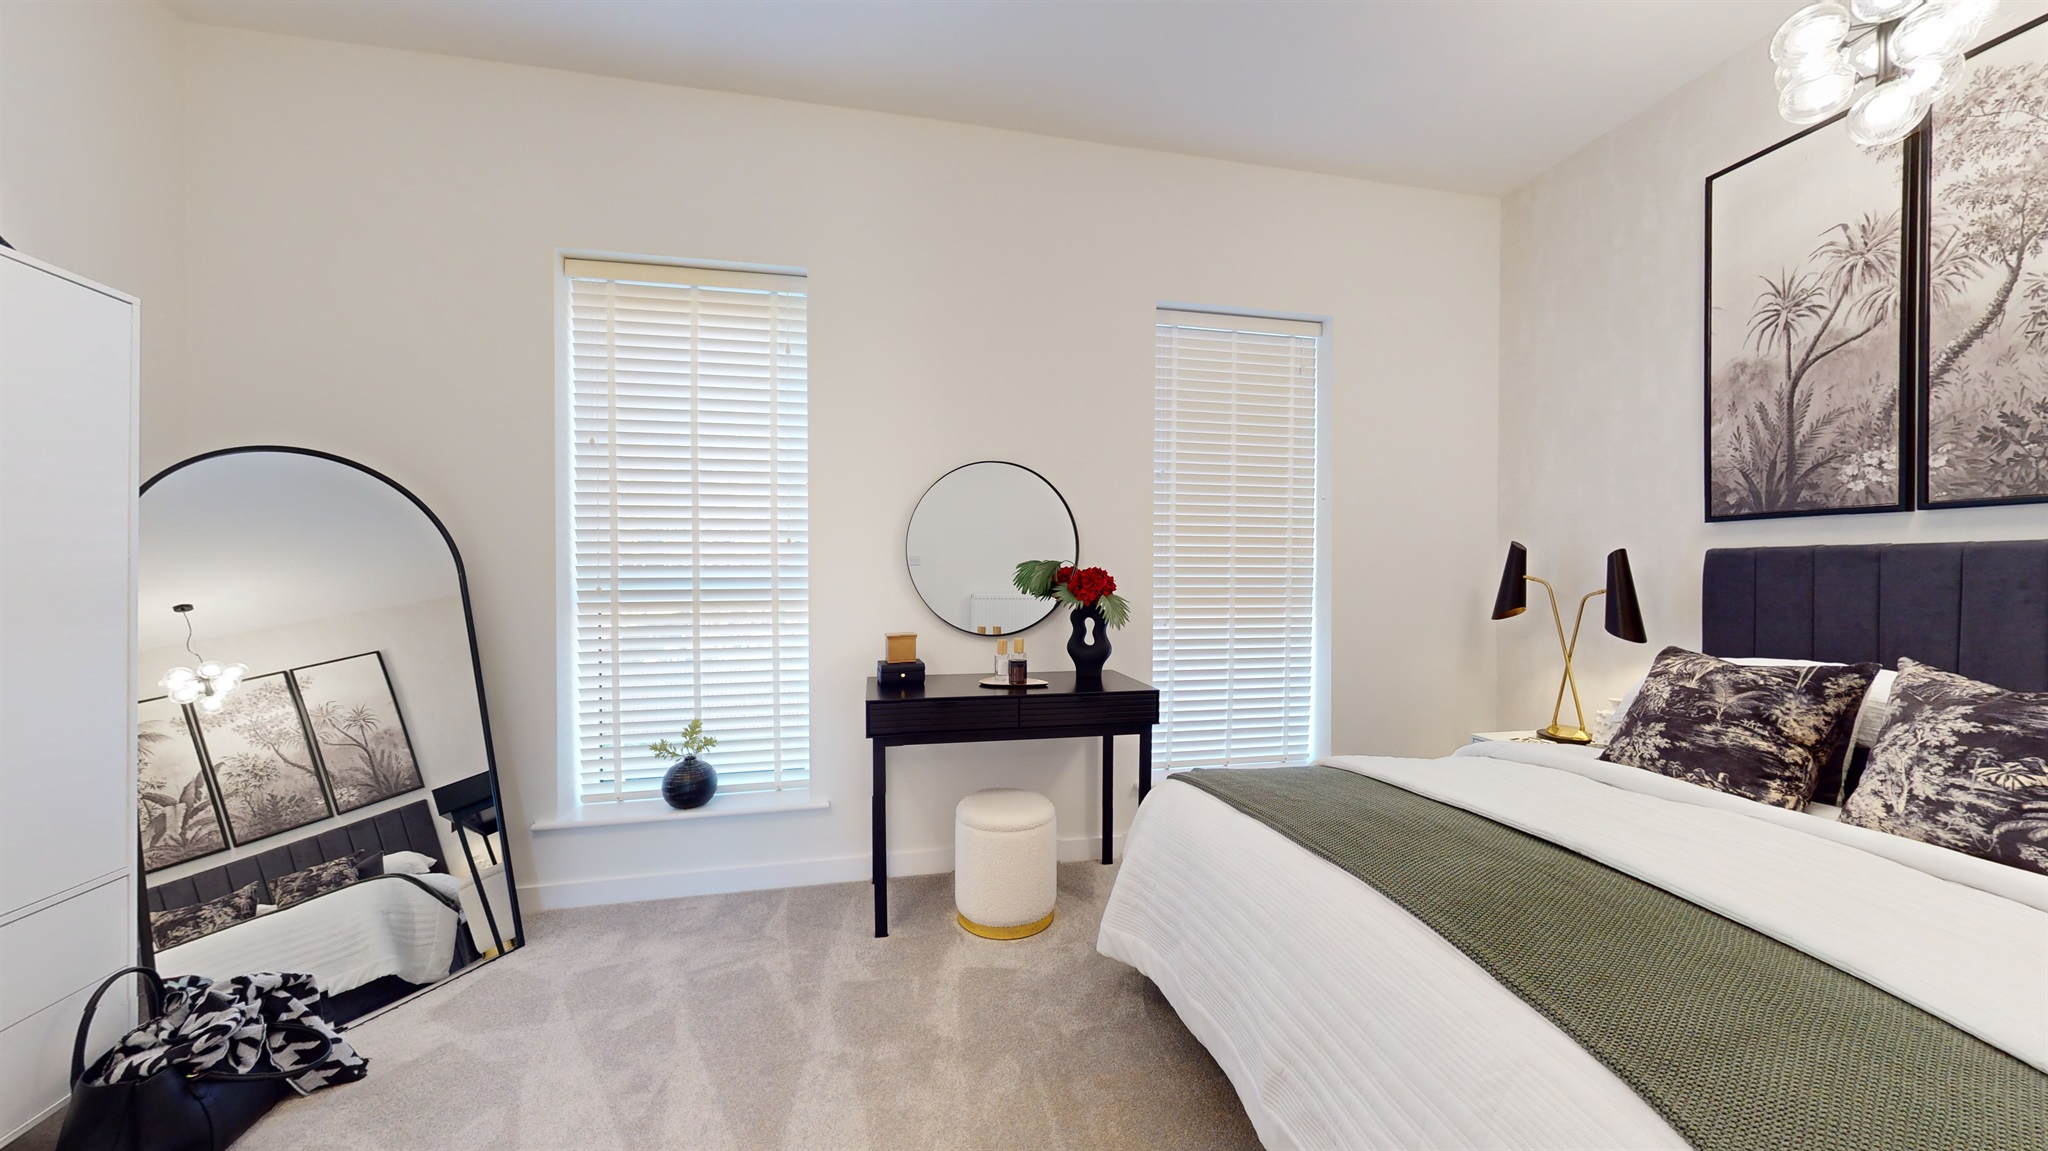 Image of a bedroom from Belgrave Village development from Connells - available to purchase through Shared Ownership on Share to Buy!